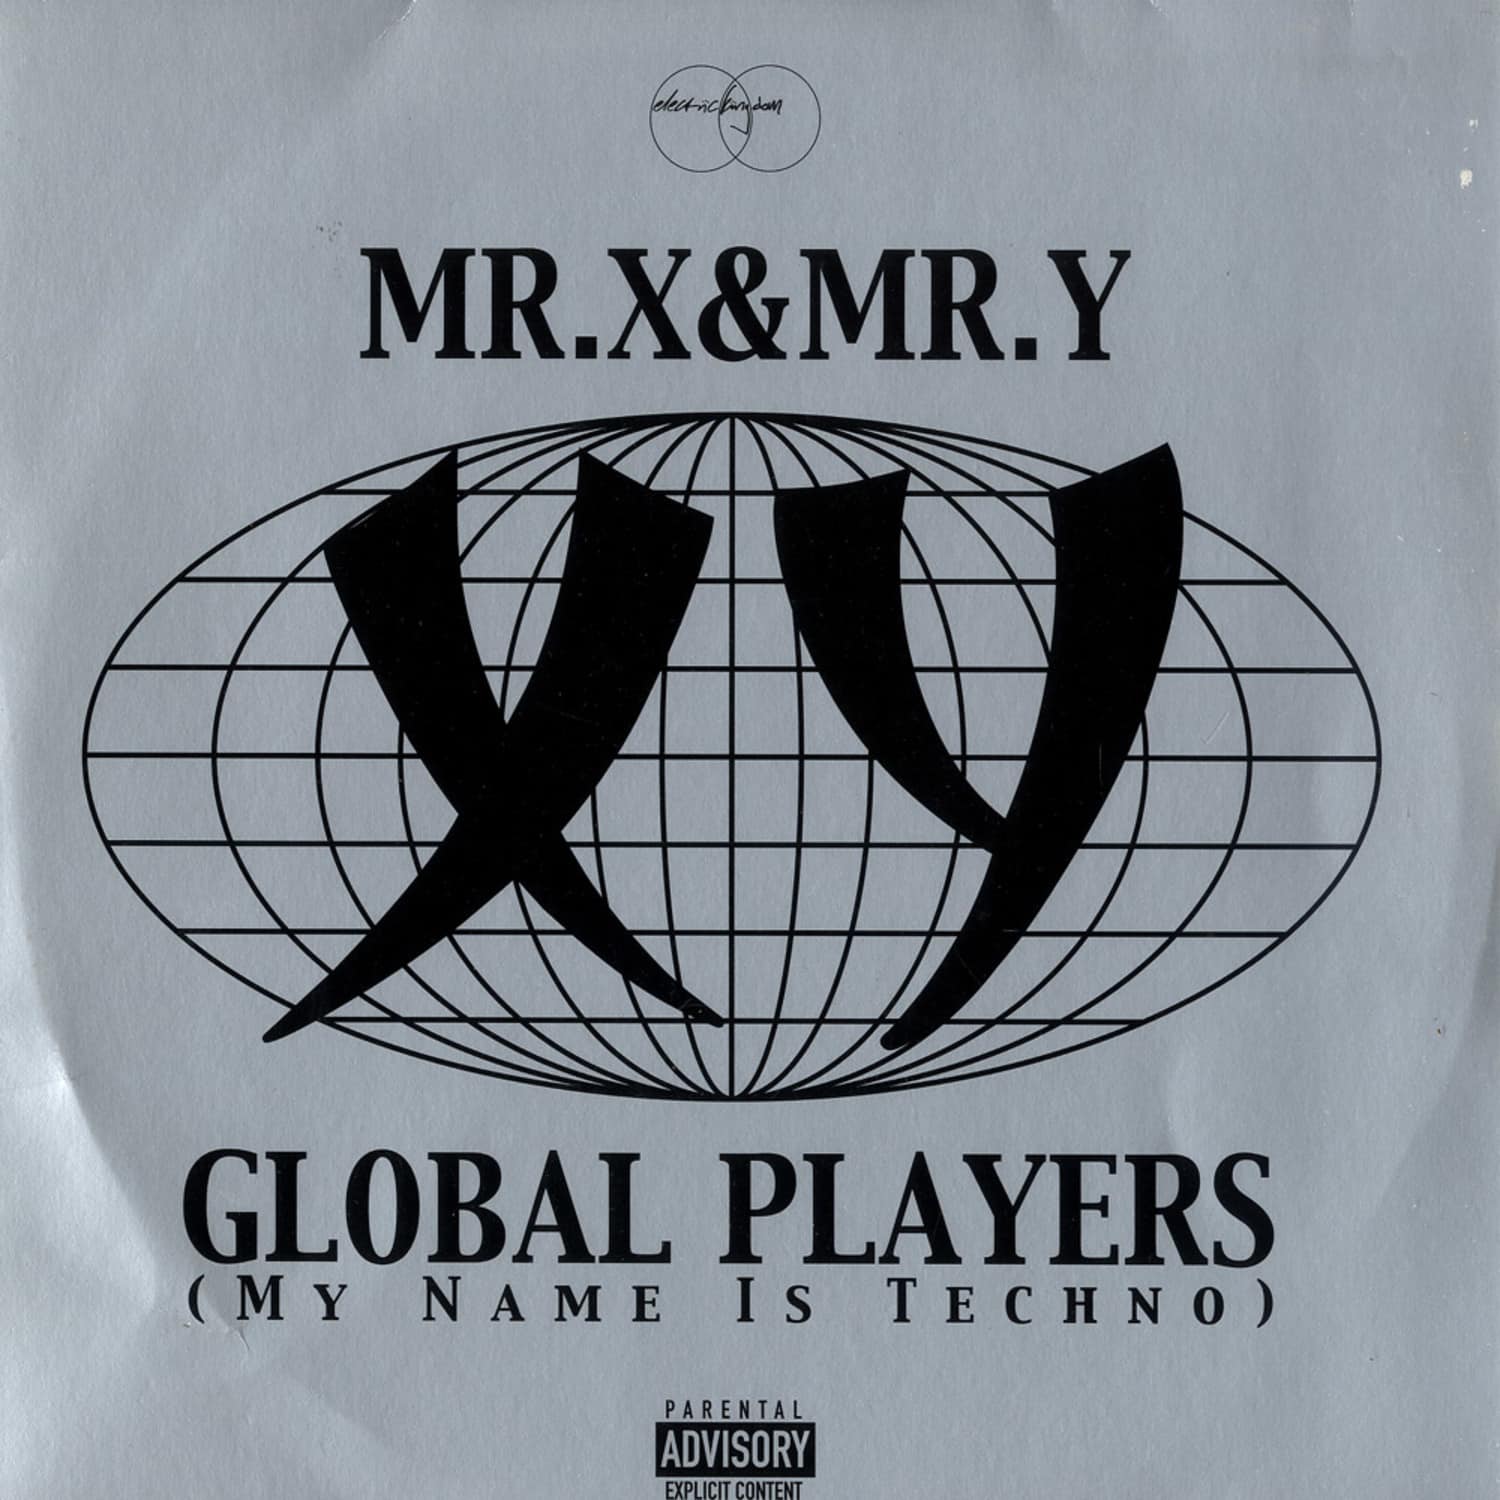 Mr X & Mr Y - GLOBAL PLAYERS / MY NAME IS TECHNO 